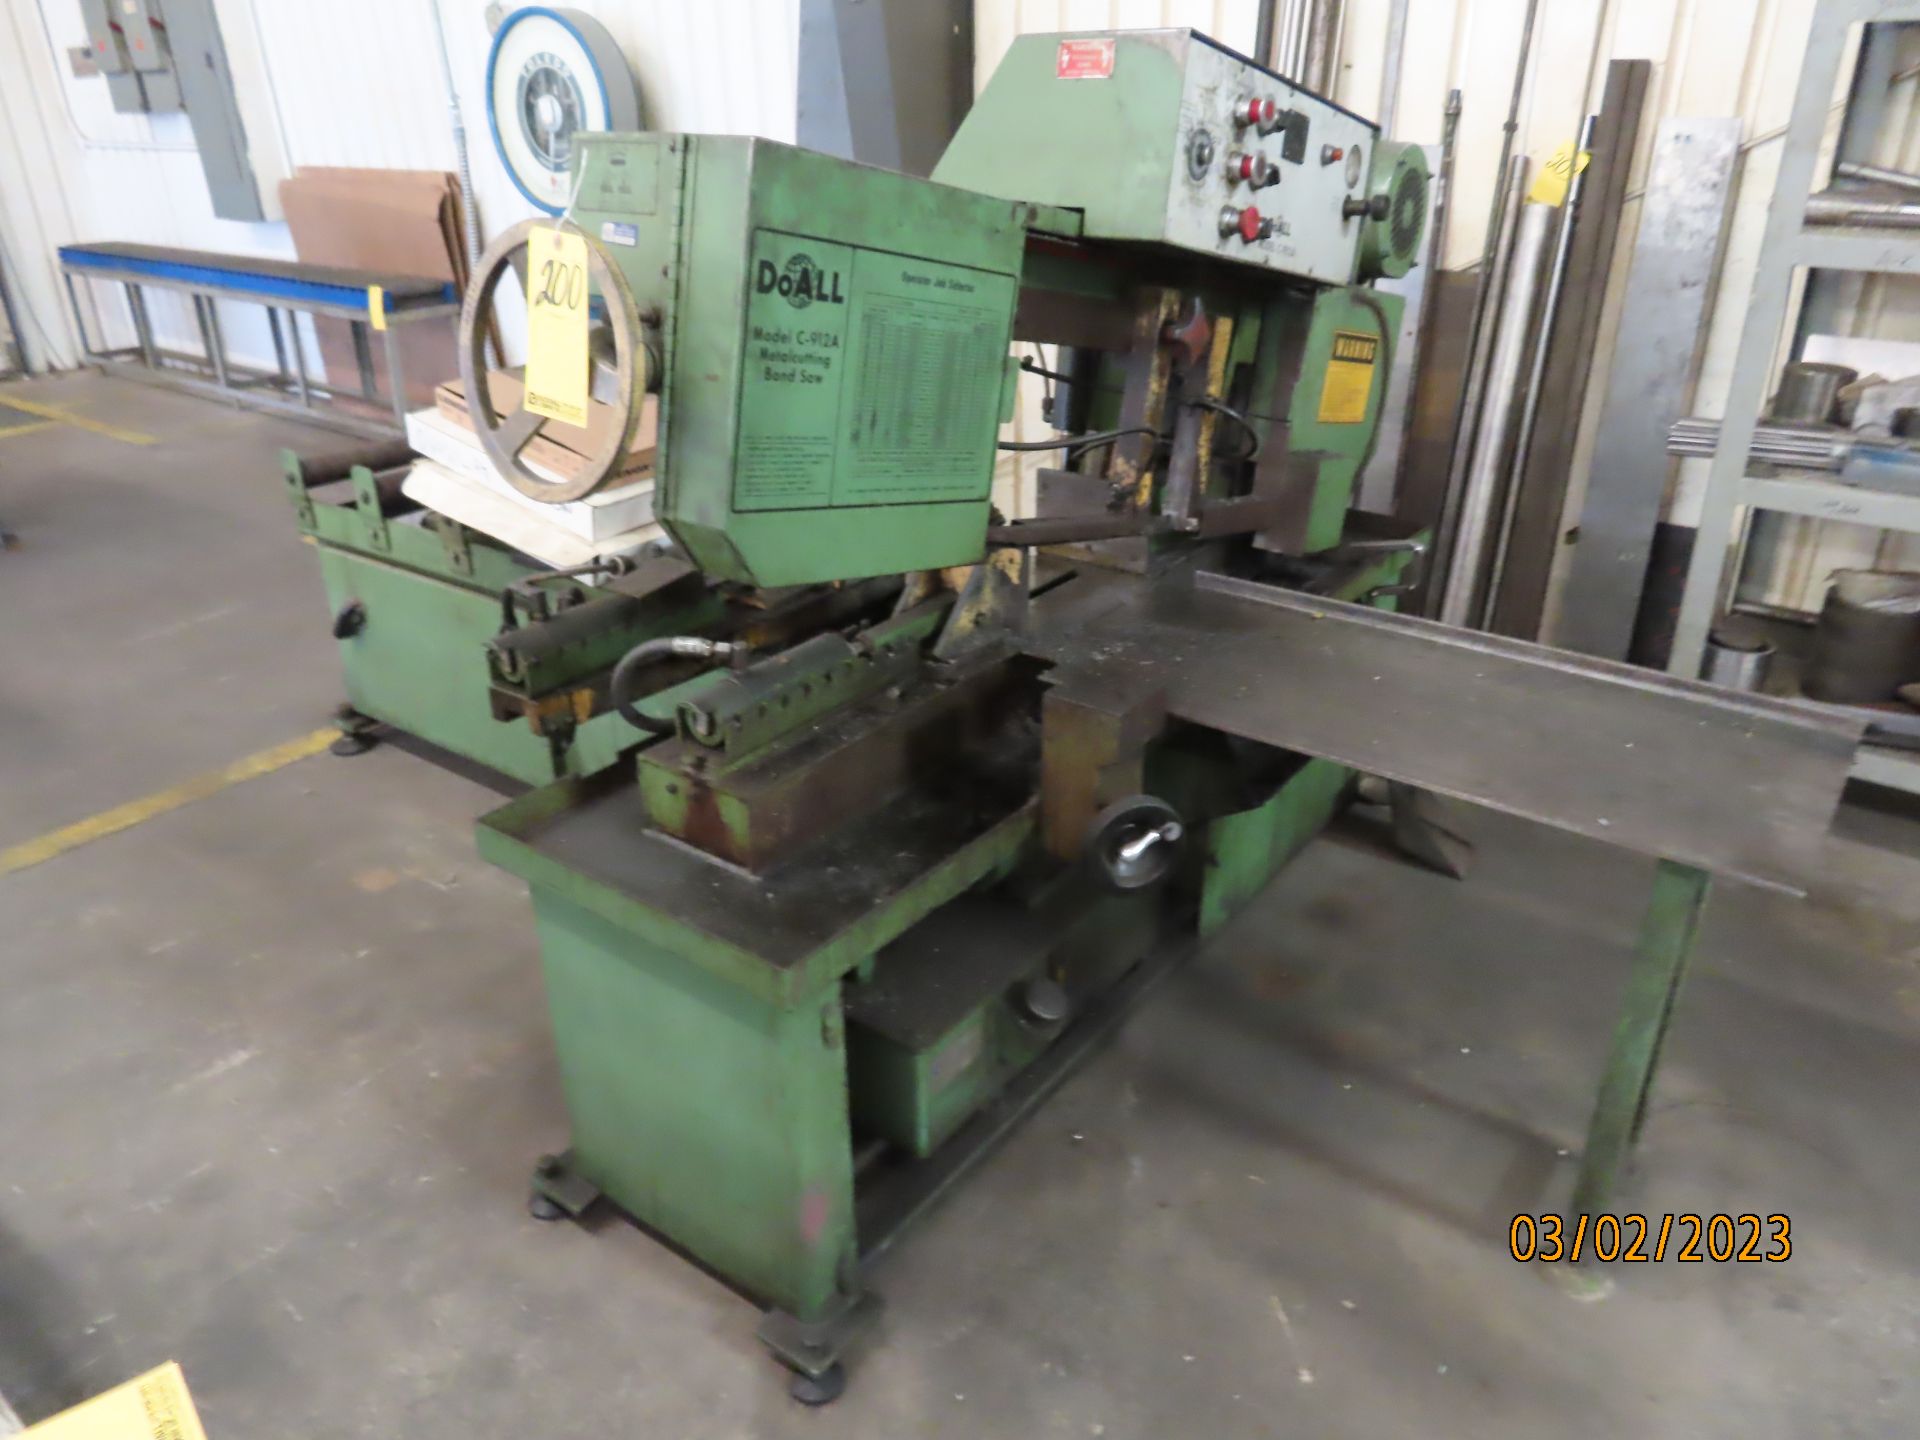 DOALL HORIZ. BANDSAW, M# C-912A, S/N 368-82550, 9" X 12" CAP., POWER CLAMP & FEED W/10' INFEED ROLLE - Image 2 of 3